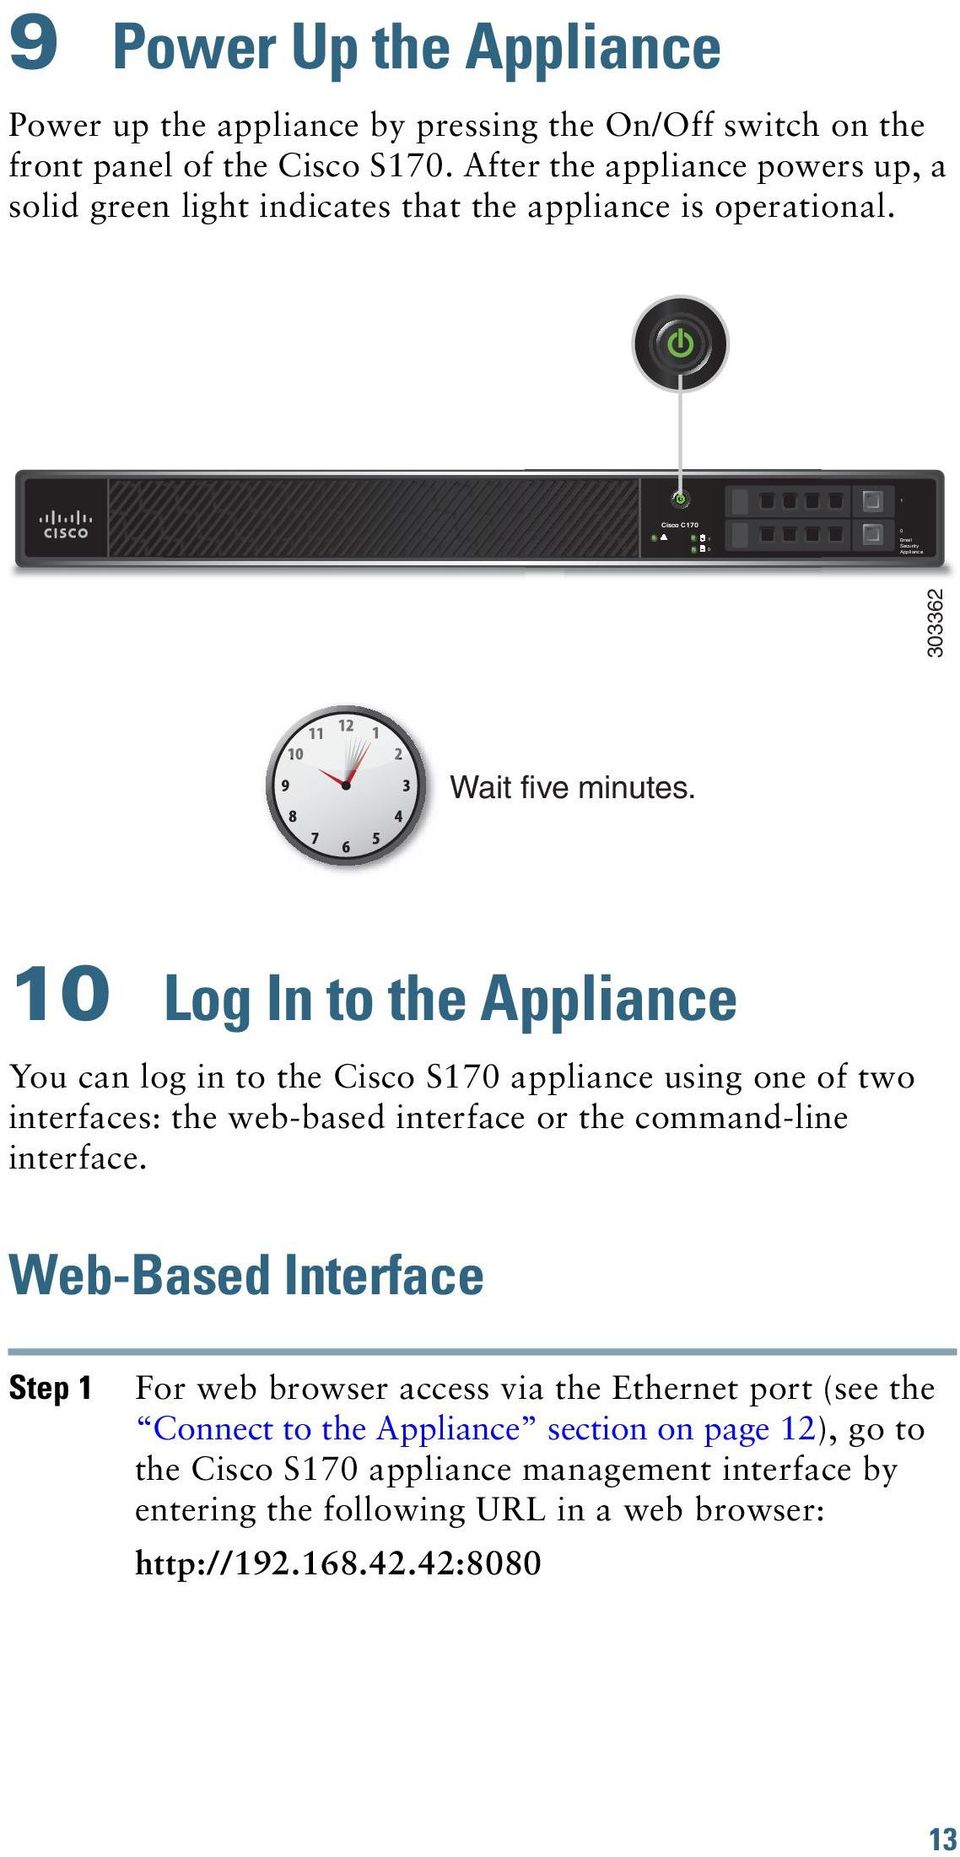 10 Log In to the Appliance You can log in to the Cisco S170 appliance using one of two interfaces: the web-based interface or the command-line interface.